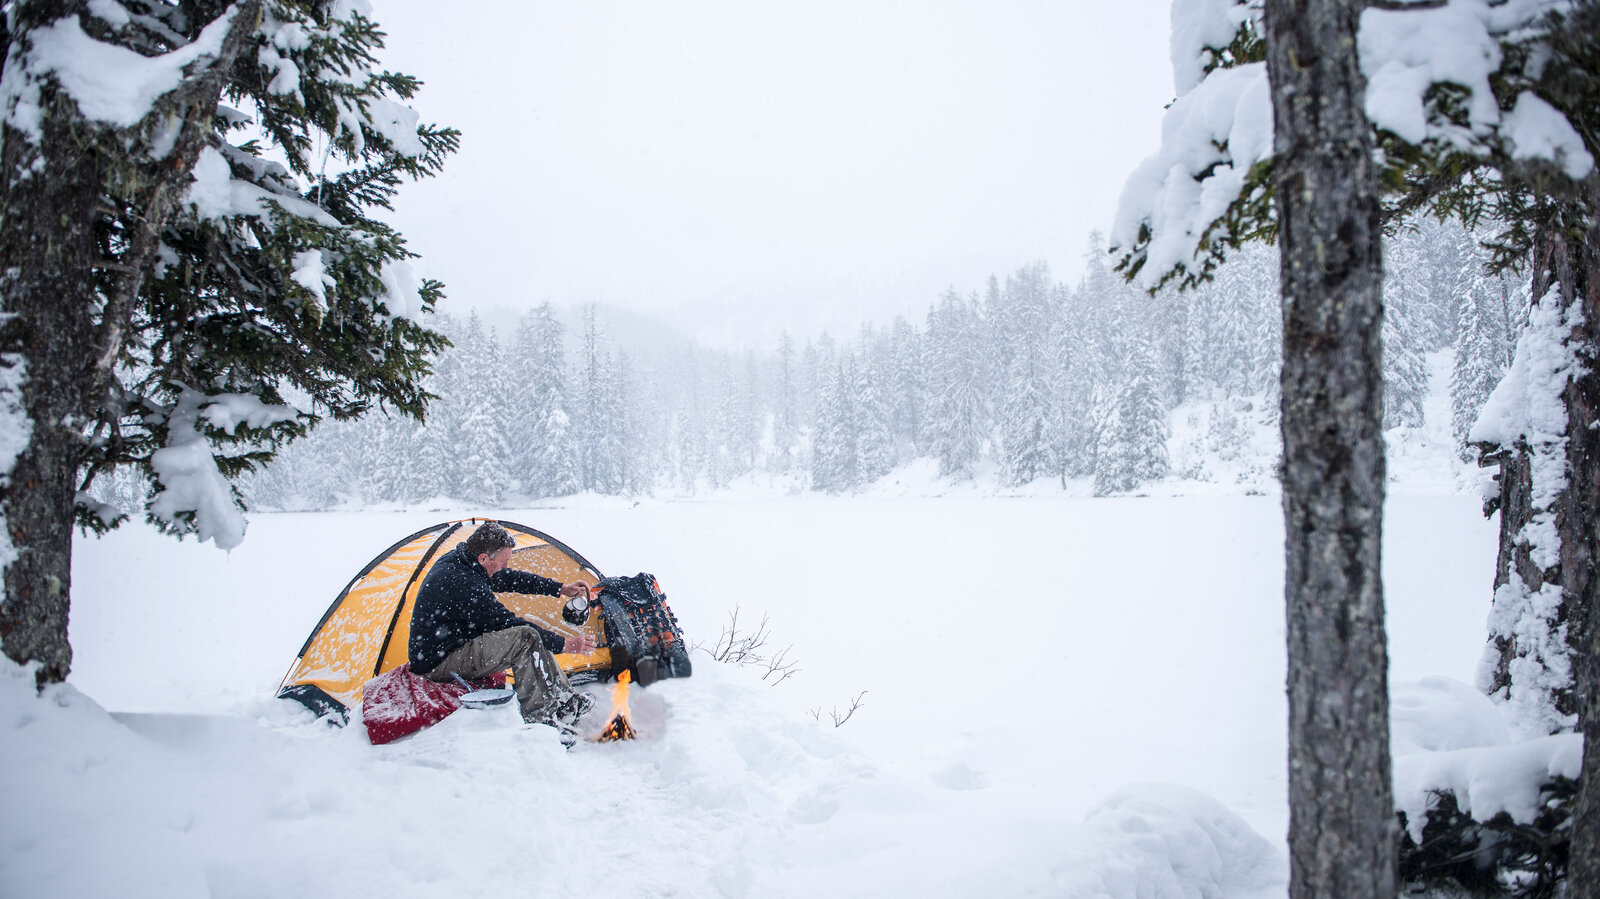 How To Insulate A Tent For Winter Camping: 12 Reliable Steps